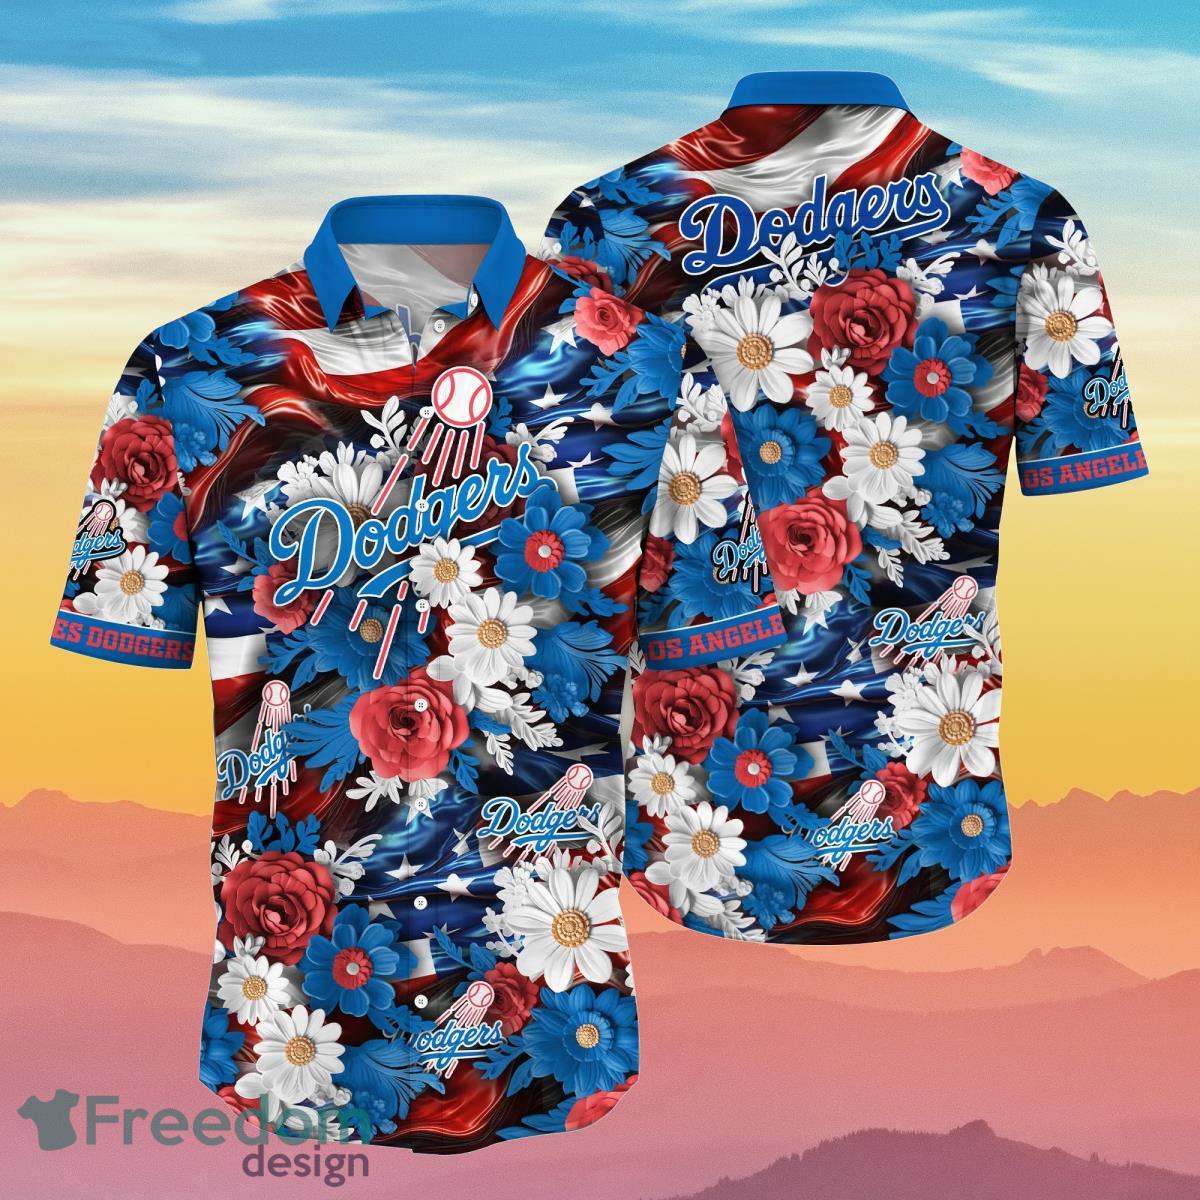 Los Angeles Dodgers MLB Hawaiian Shirt 4th Of July Independence Day Special  Gift For Men And Women Fans - Freedomdesign